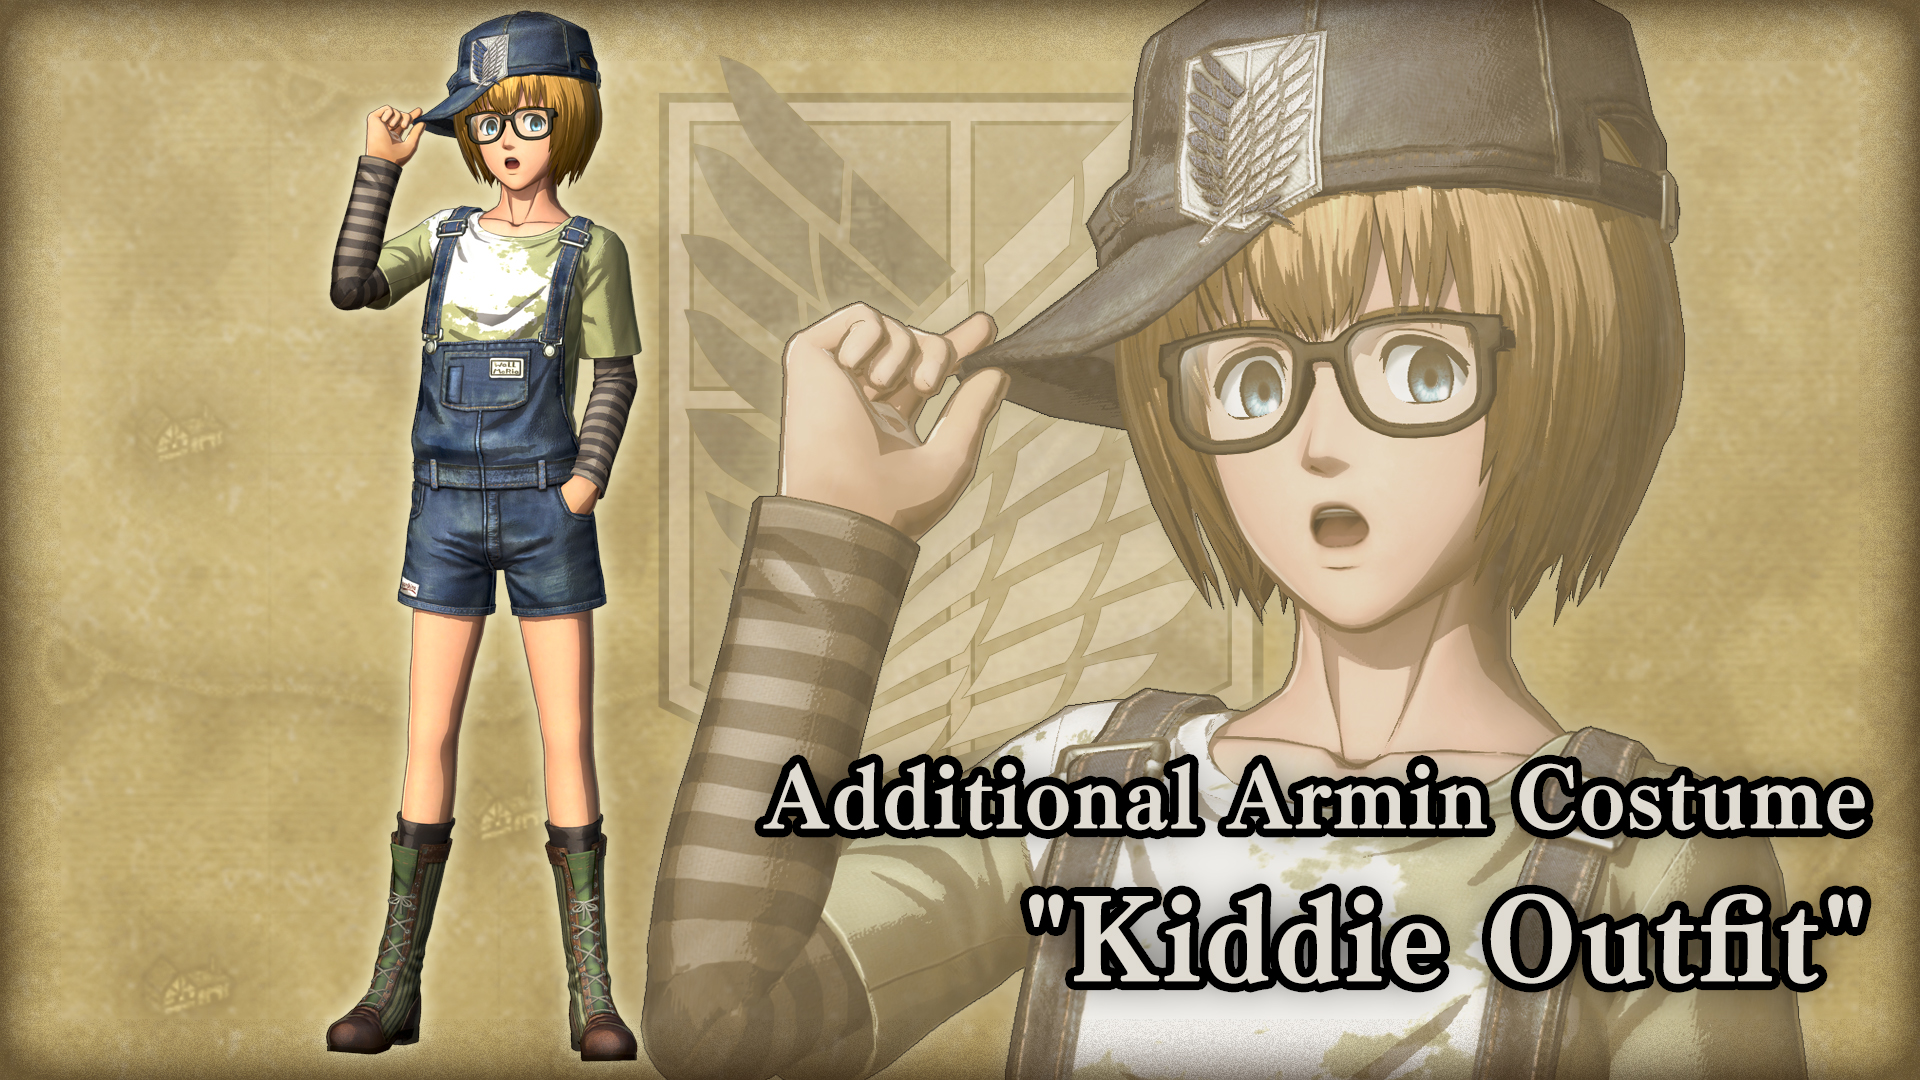 Additional Armin Costume: "Kiddie Outfit"